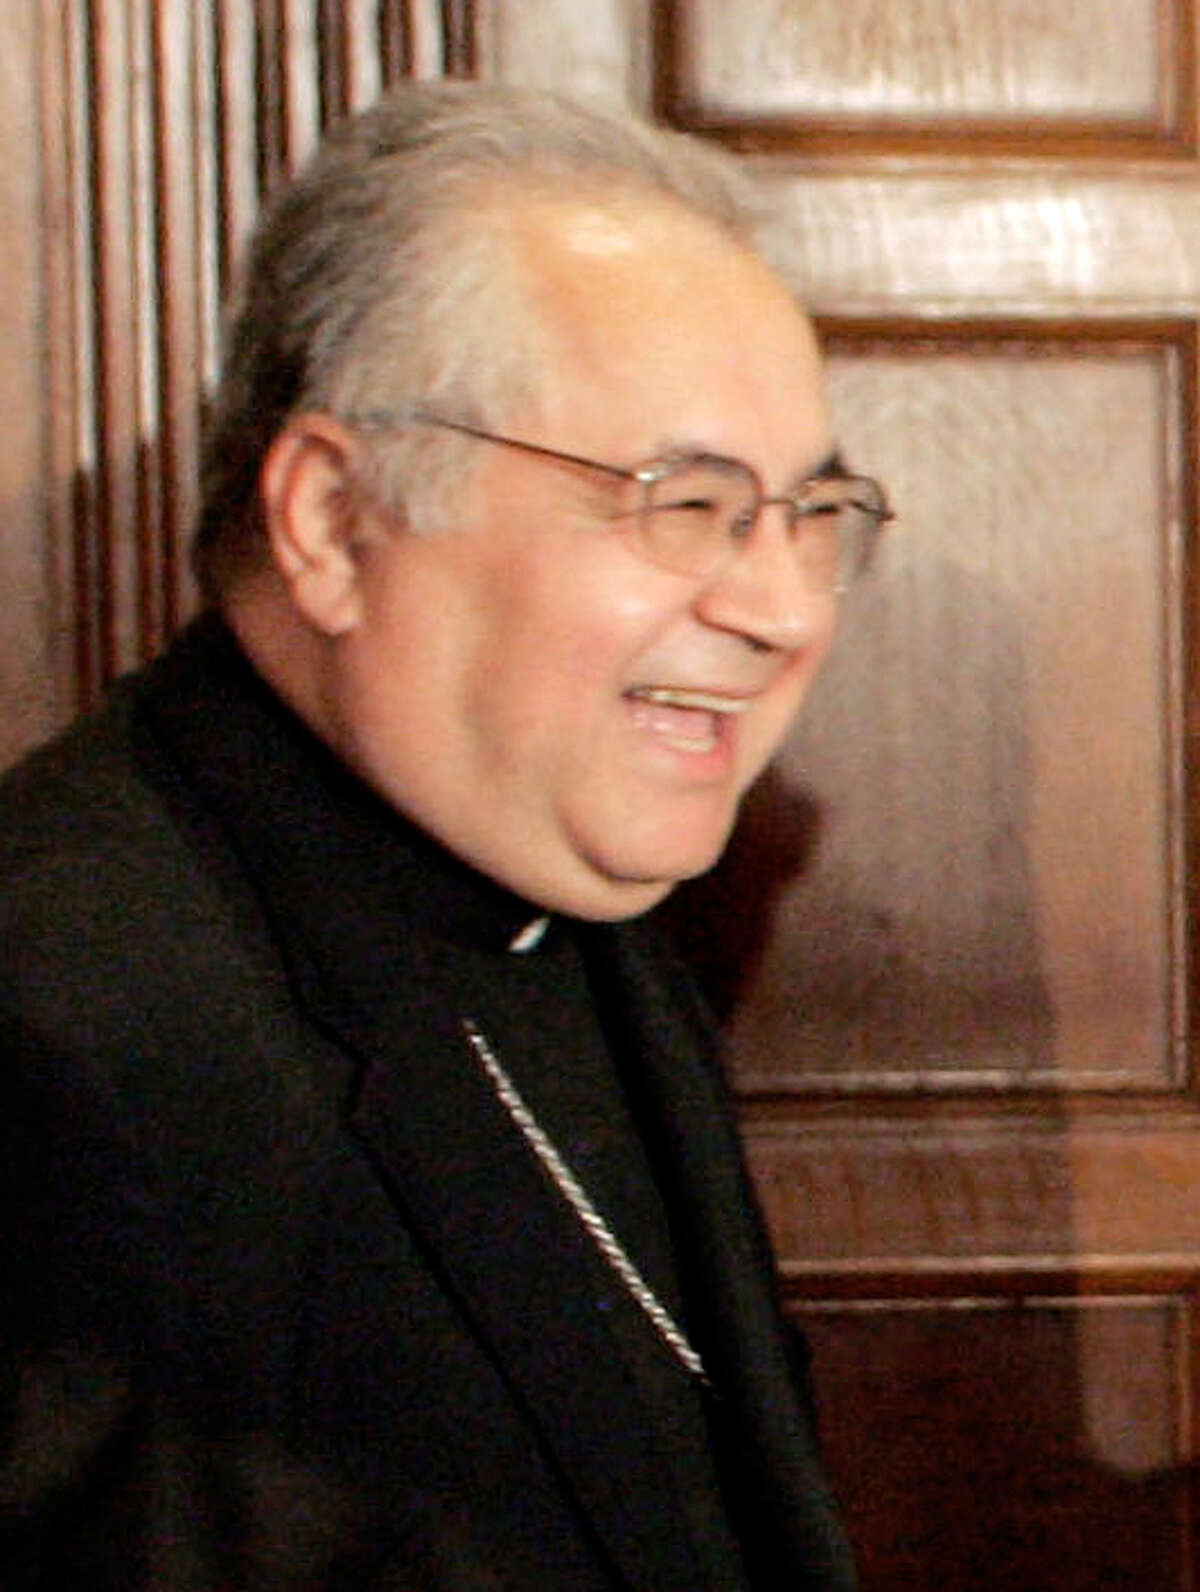 This May 26, 2006 photo shows Auxiliary Bishop of Los Angeles Gabino Zavala. Bishop Zavala resigned Wednesday Jan. 4 2012 after after admitting that he fathered two children who are now teenagers. In a letter to the faithful, Los Angeles Archbishop Jose Gomez says Zavala told him in December that he had two children who live with their mother in a different state. Gomez says the archdiocese has offered to help with the children?s college costs. (AP Photo/La Opinion, Emilio Flores)